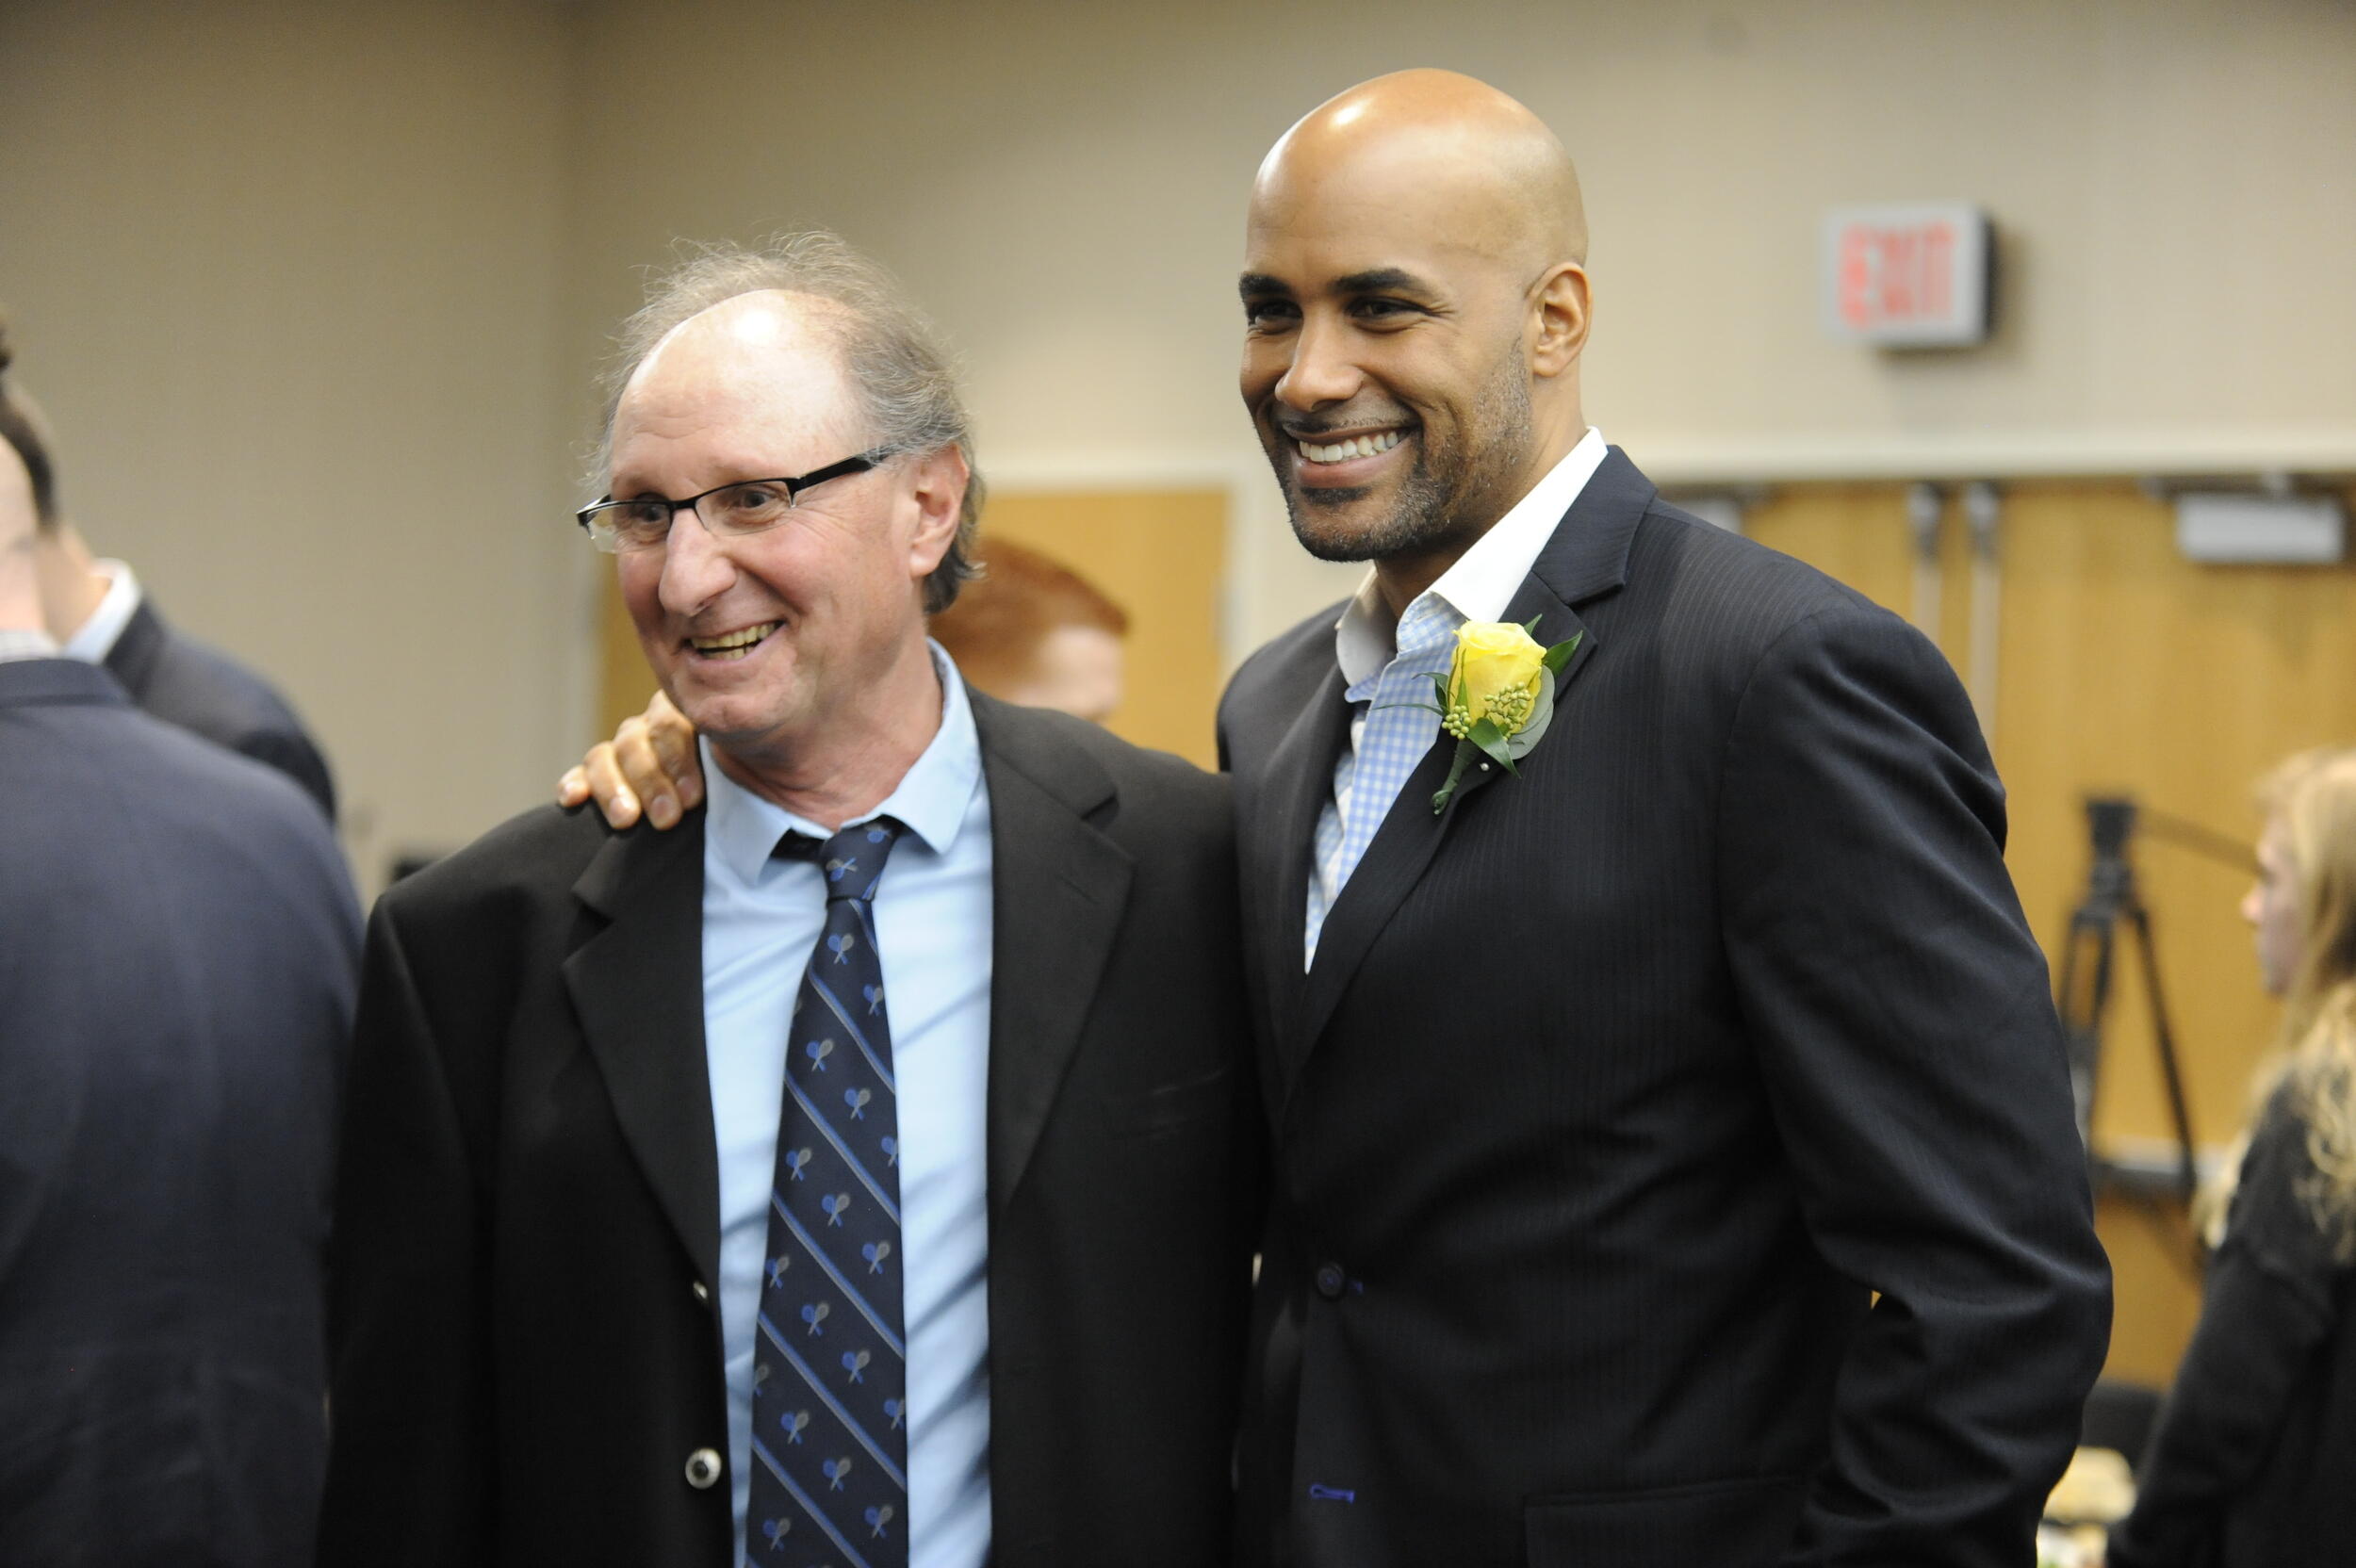 Kodjoe, right, pictured with VCU tennis coach Paul Kostin at Kodjoe's induction into the VCU Athletics Hall of Fame in 2017. (Photo credit: VCU Athletics)